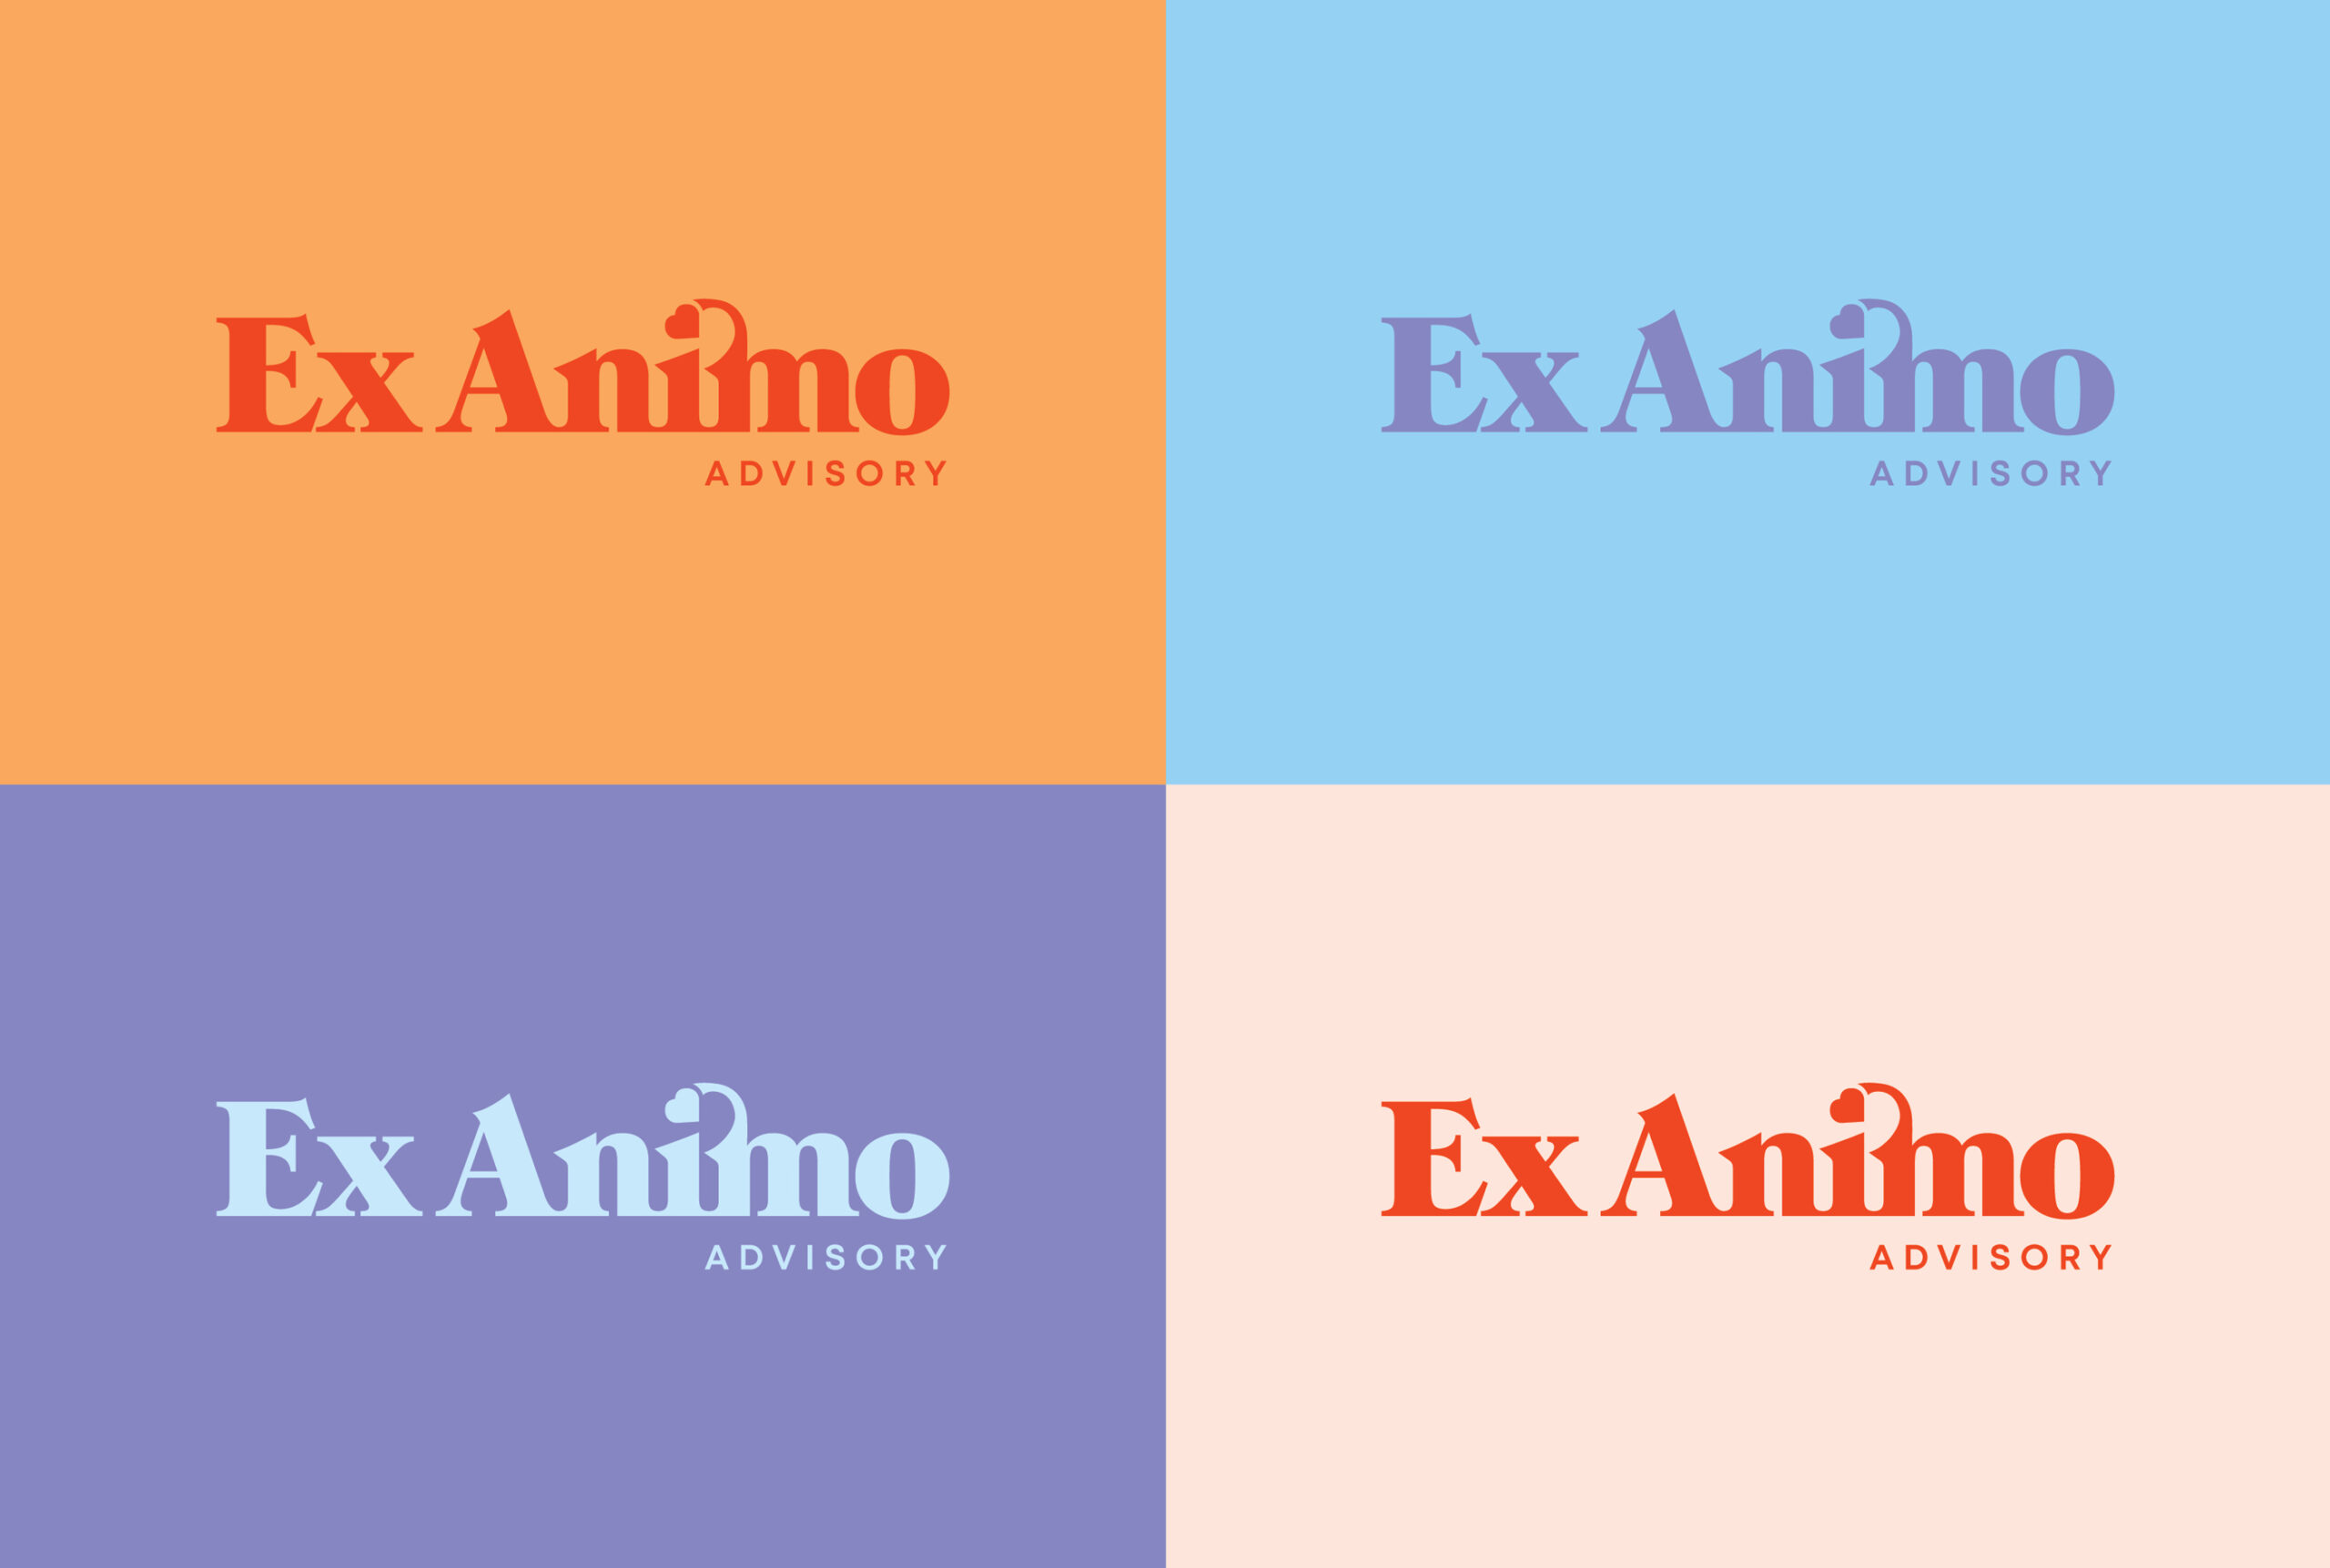 Ex Animo Advisory Tax & Accounting, Graphic Design, Website and Branding Design and Development by TL Design Co.